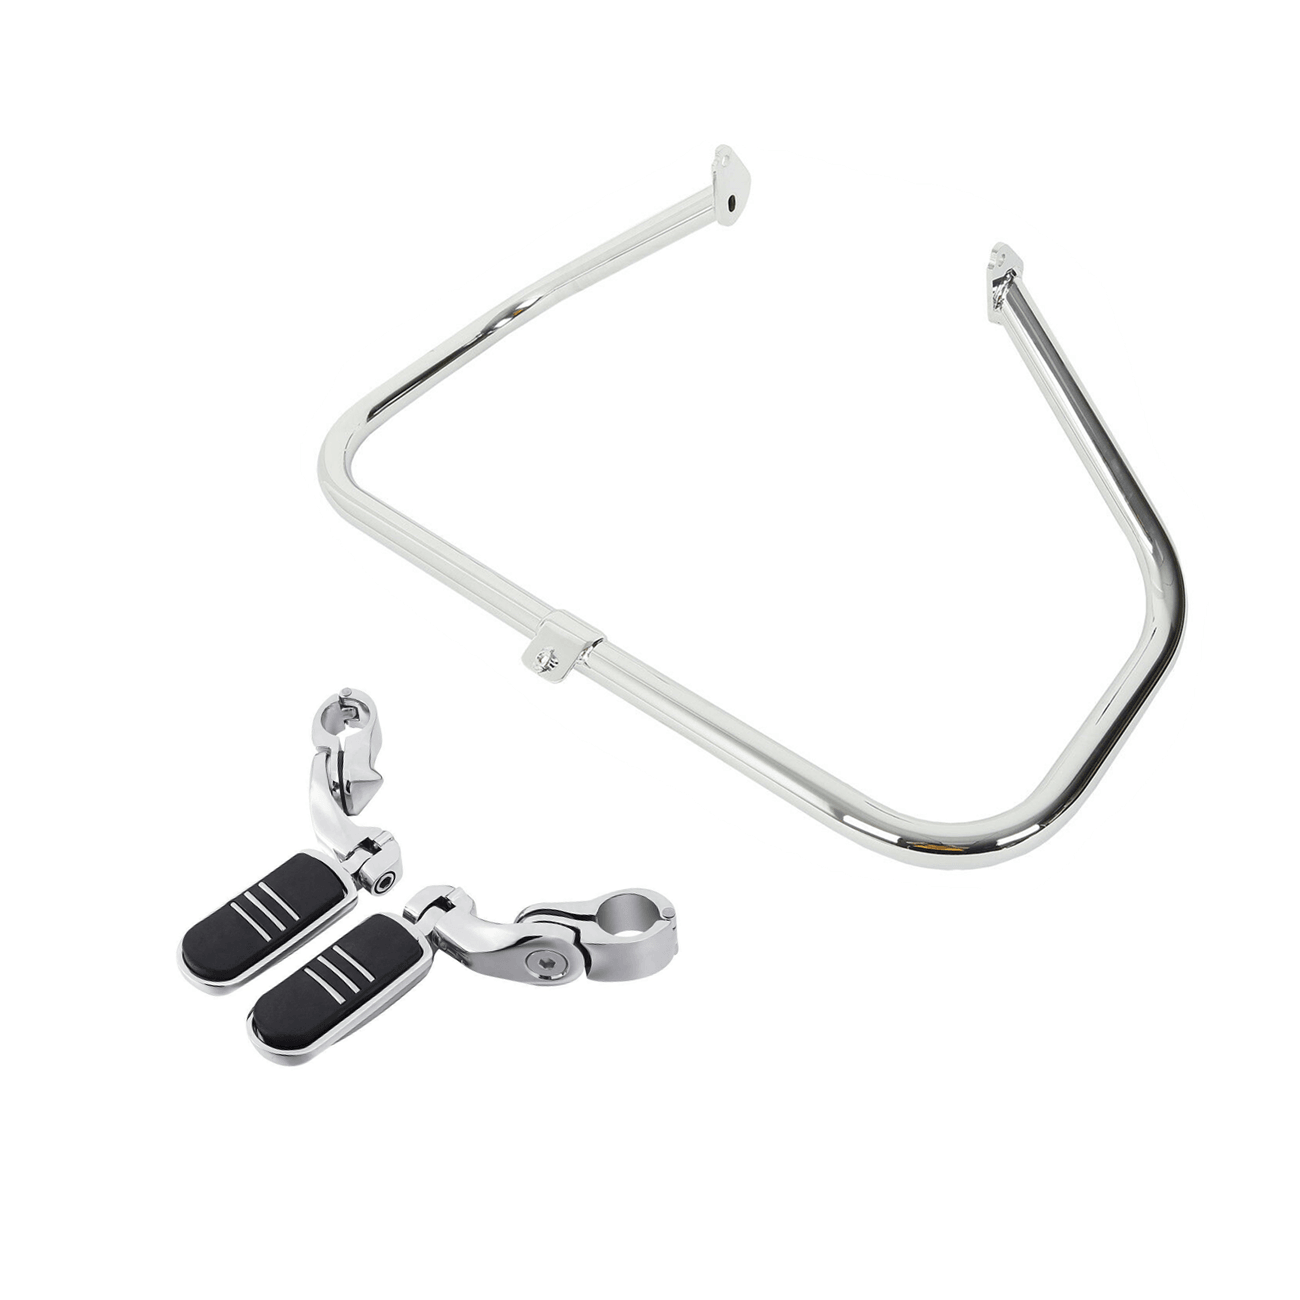 Chrome Engine Guard Crash Bar W/ Footpeg Fit For Harley Road King Glide 97-08 07 - Moto Life Products